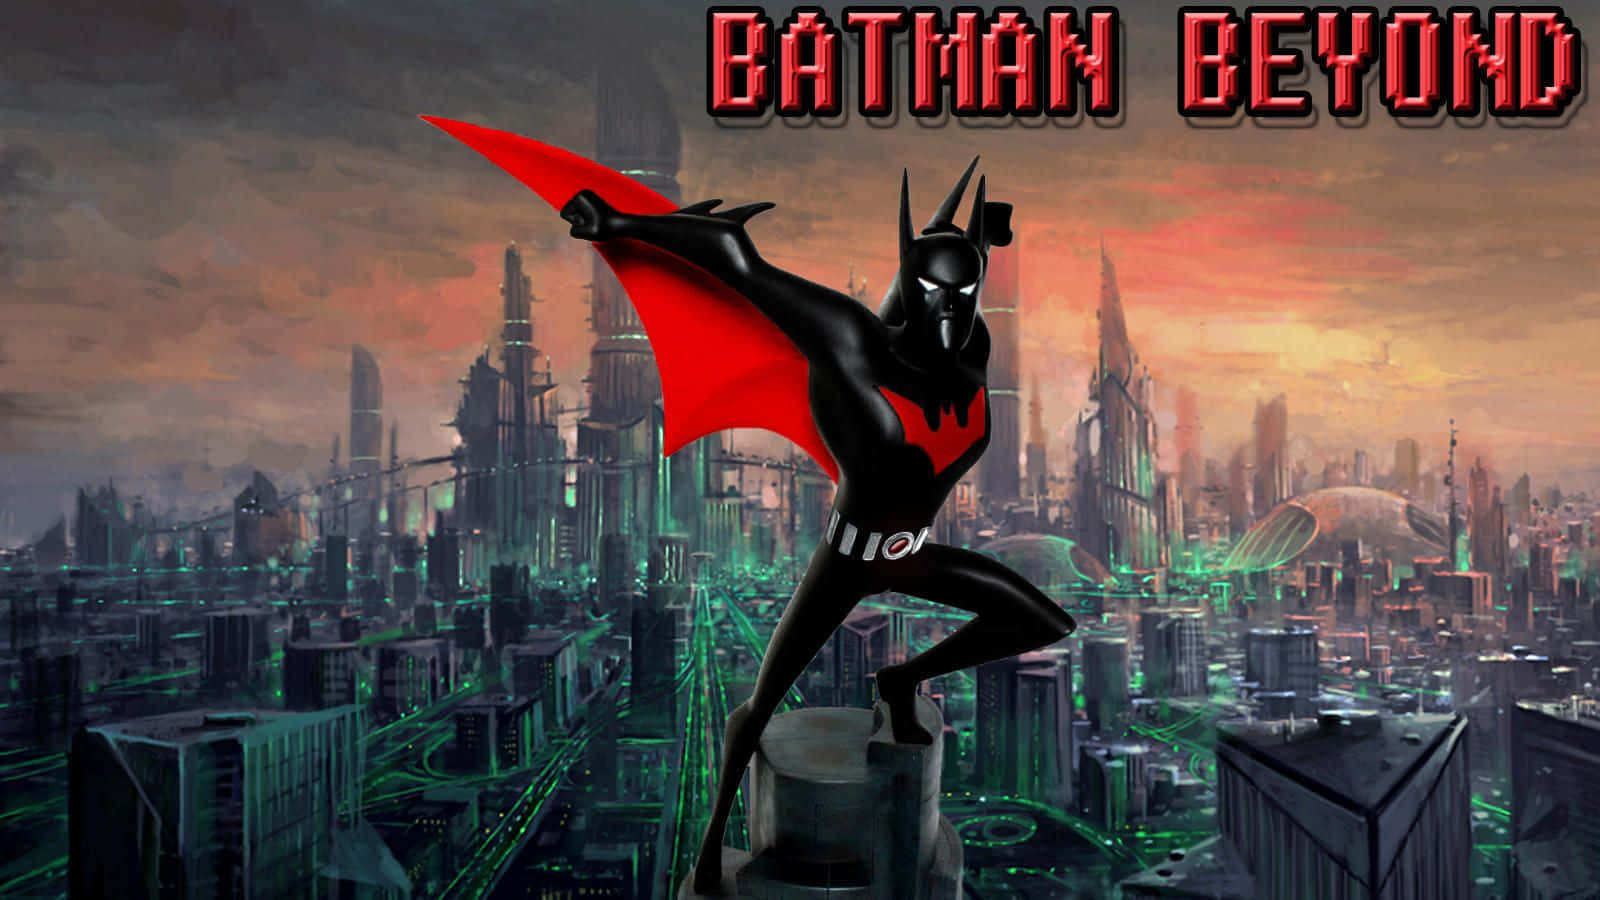 Batman Beyond - patrols the city with power and grace